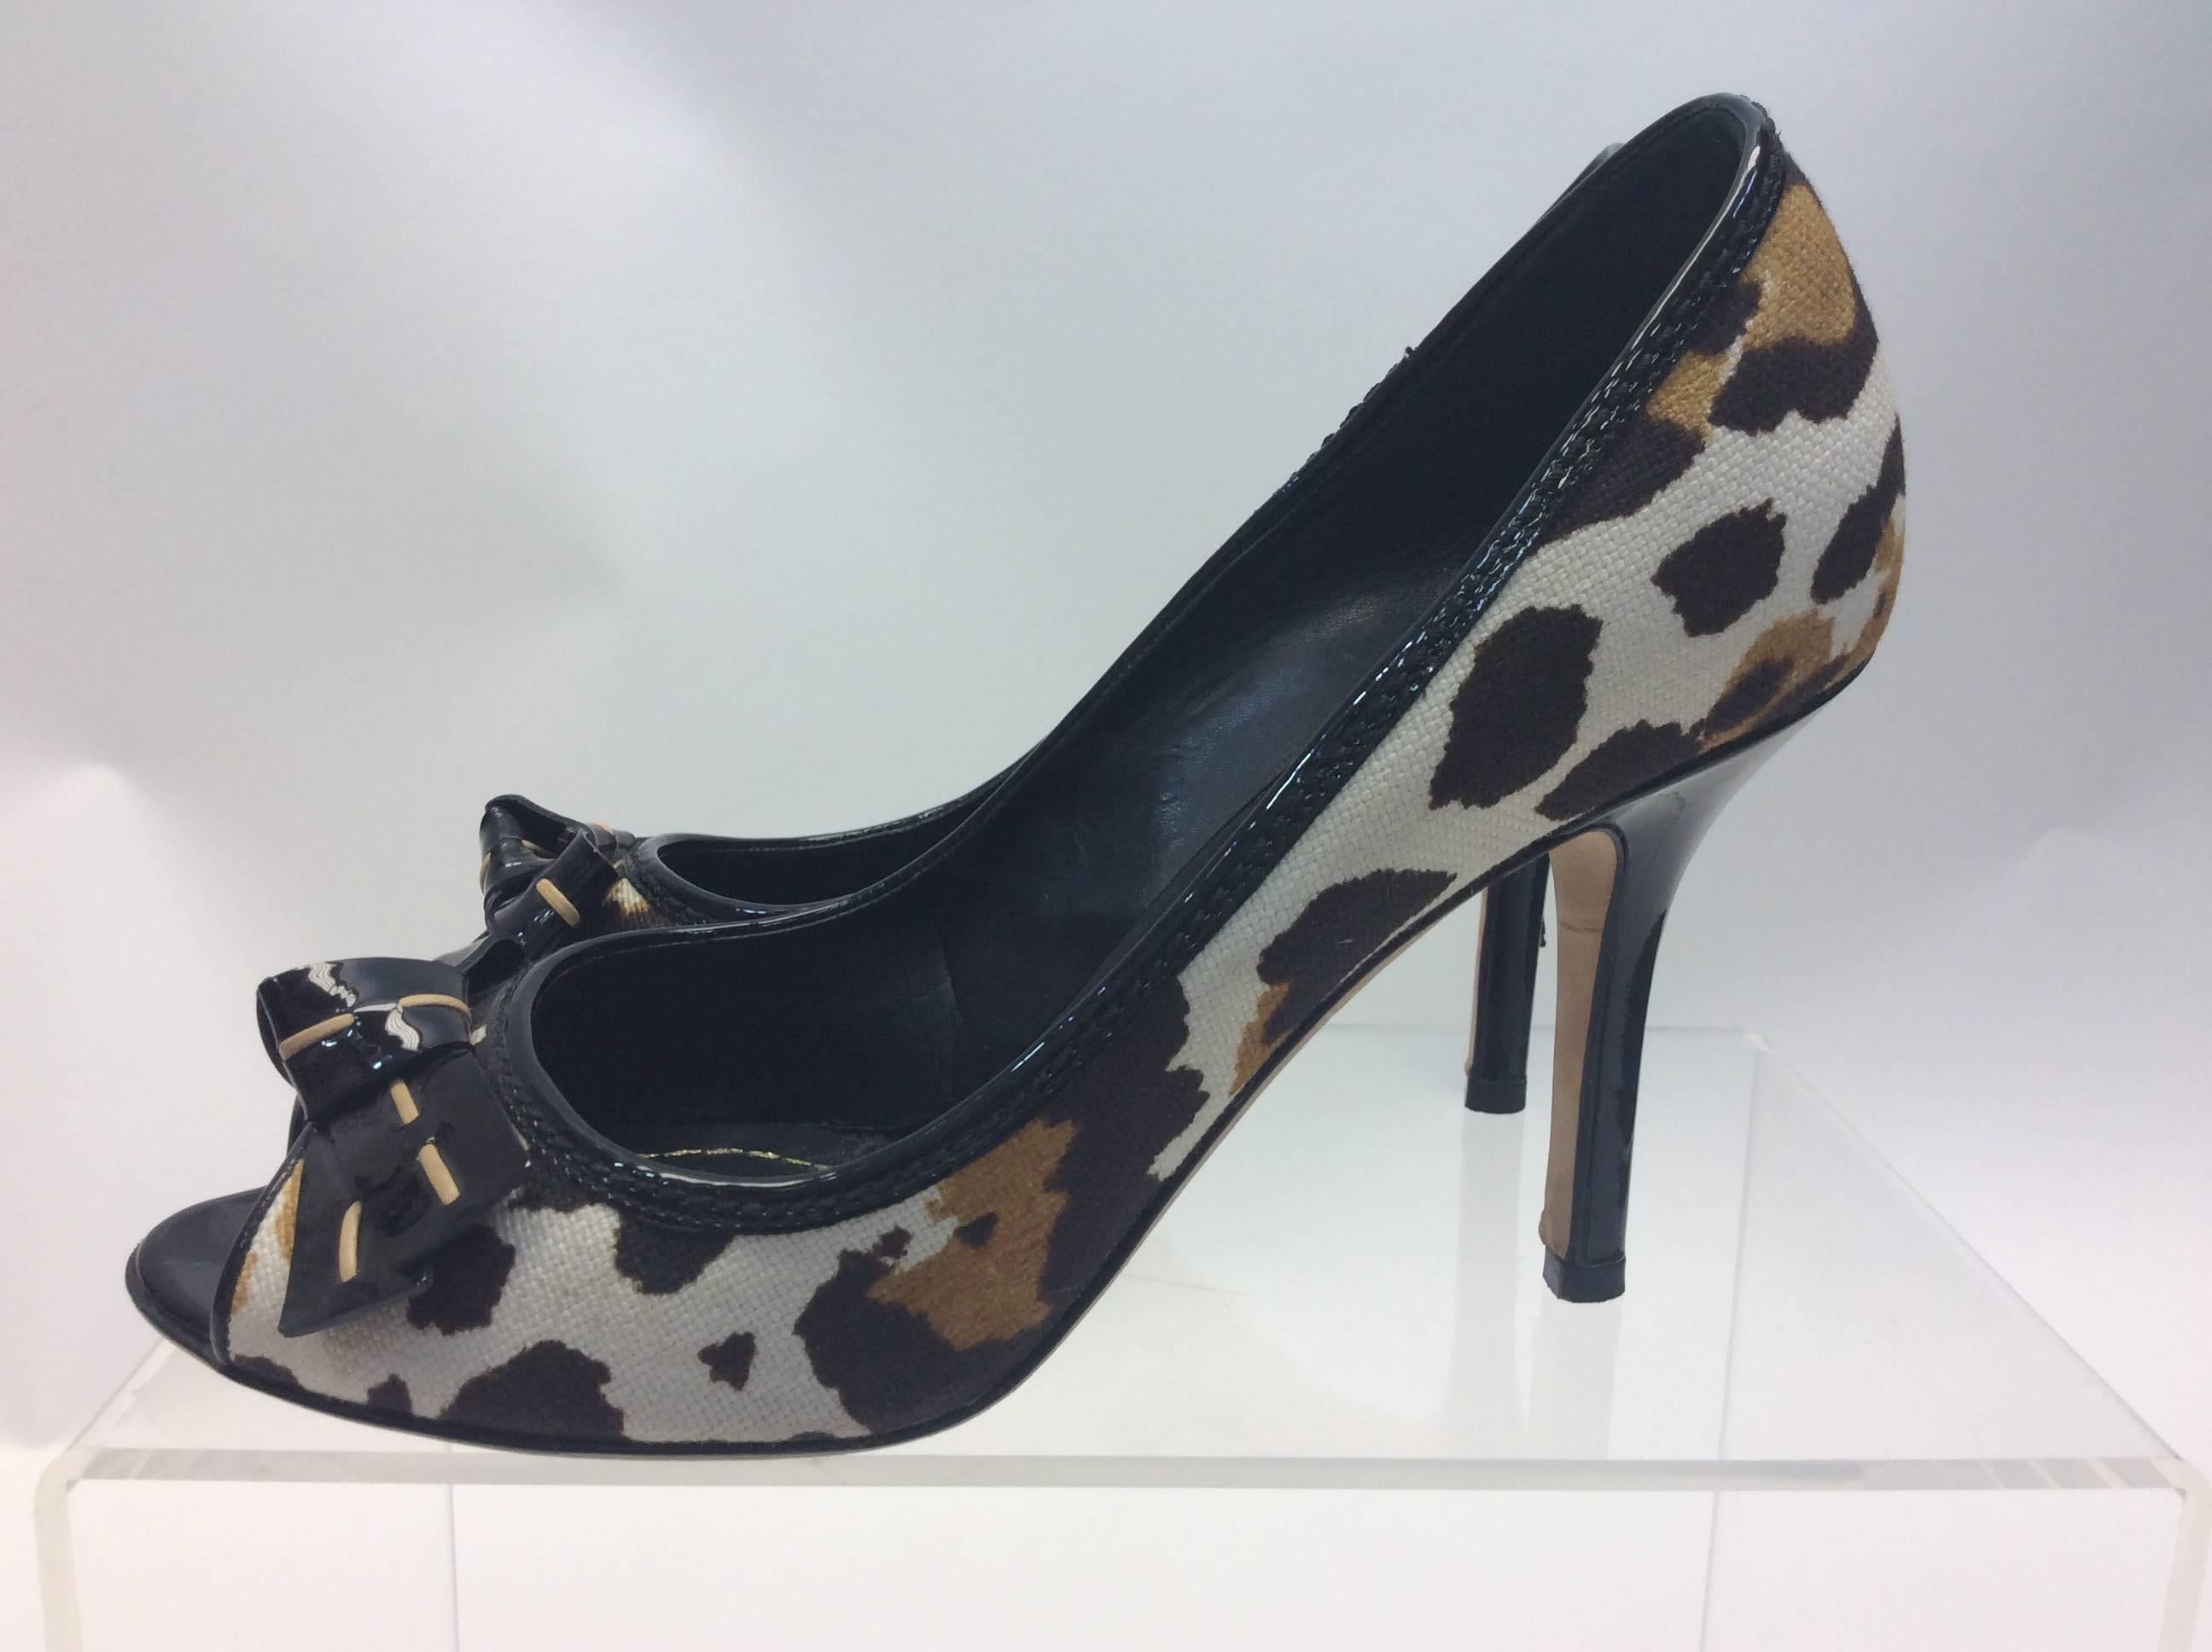 Christian Dior Animal Print Peep Toe Pump with Bow
$165
Made in Italy
Size 38
3